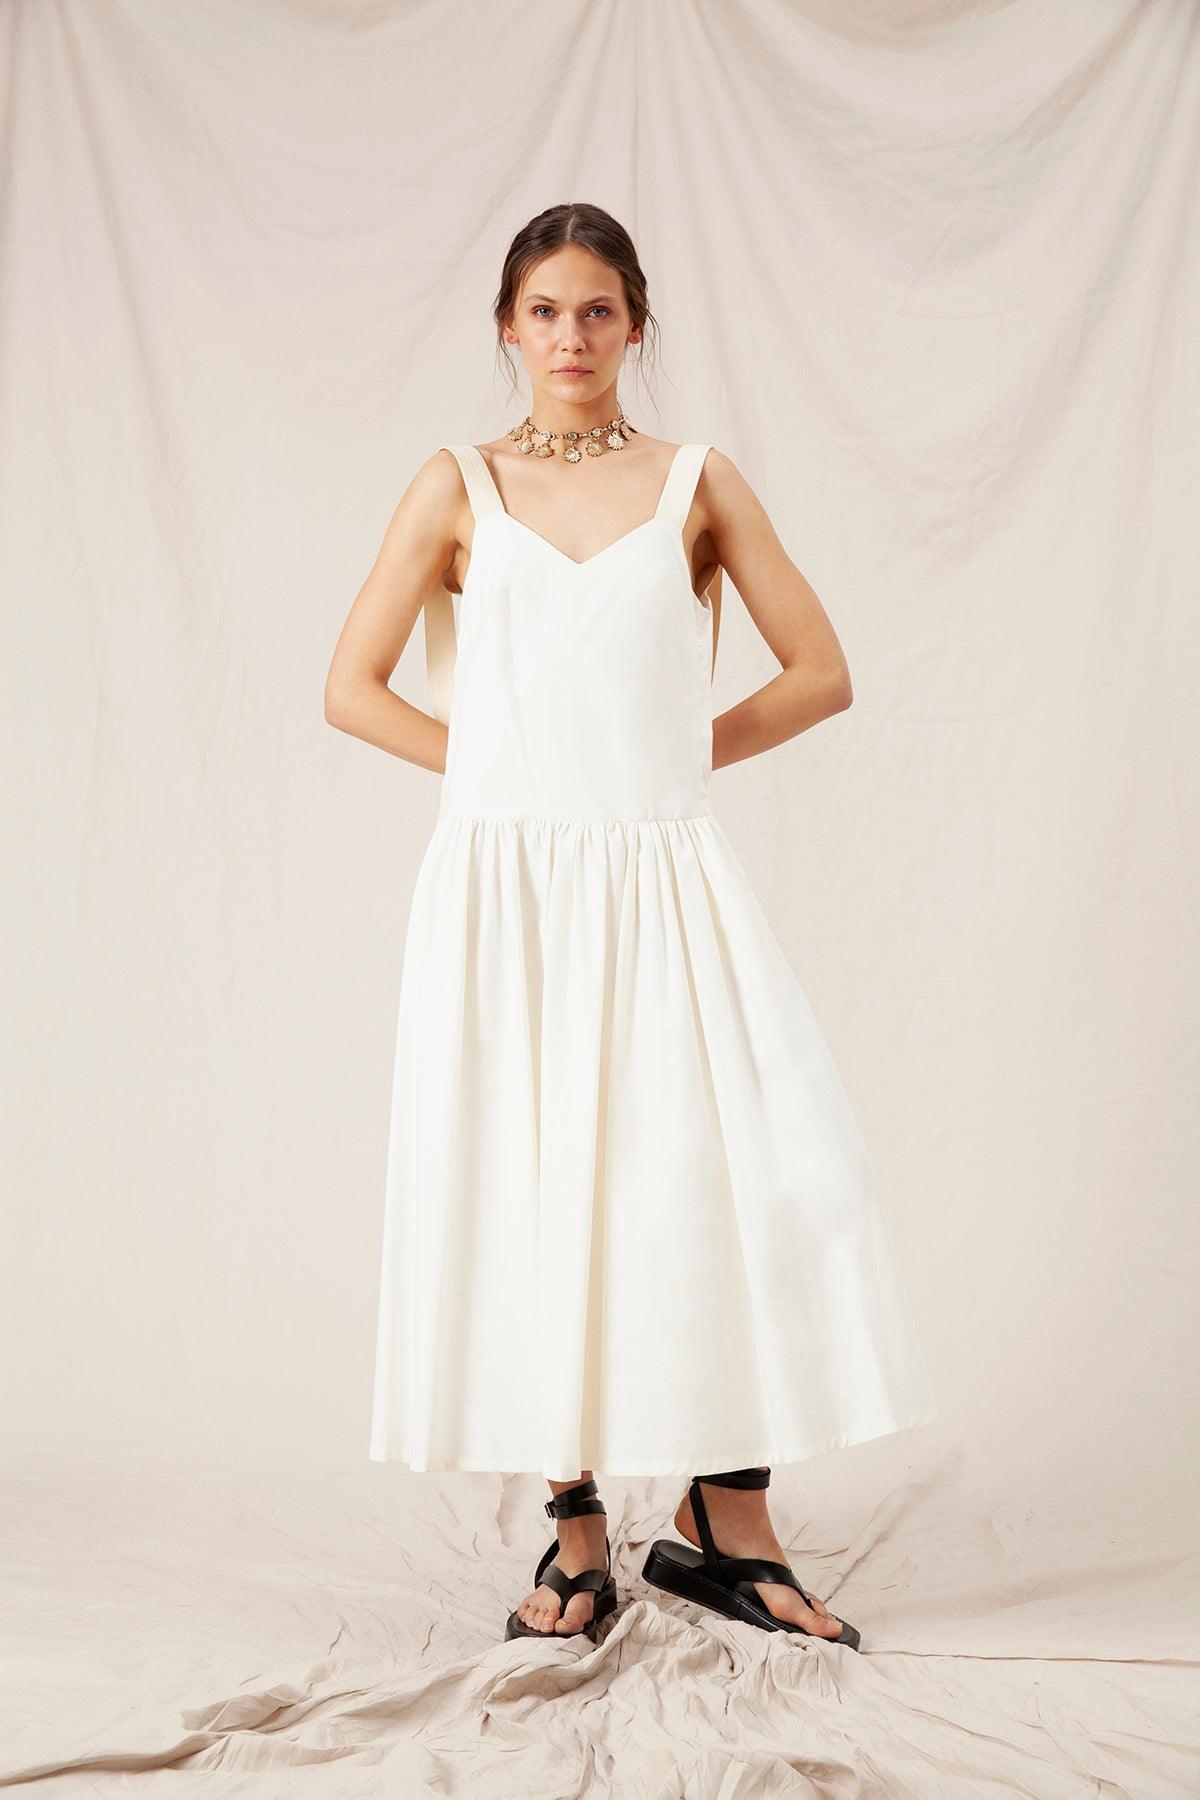 Buy The Ivory Dress by Ladiesse